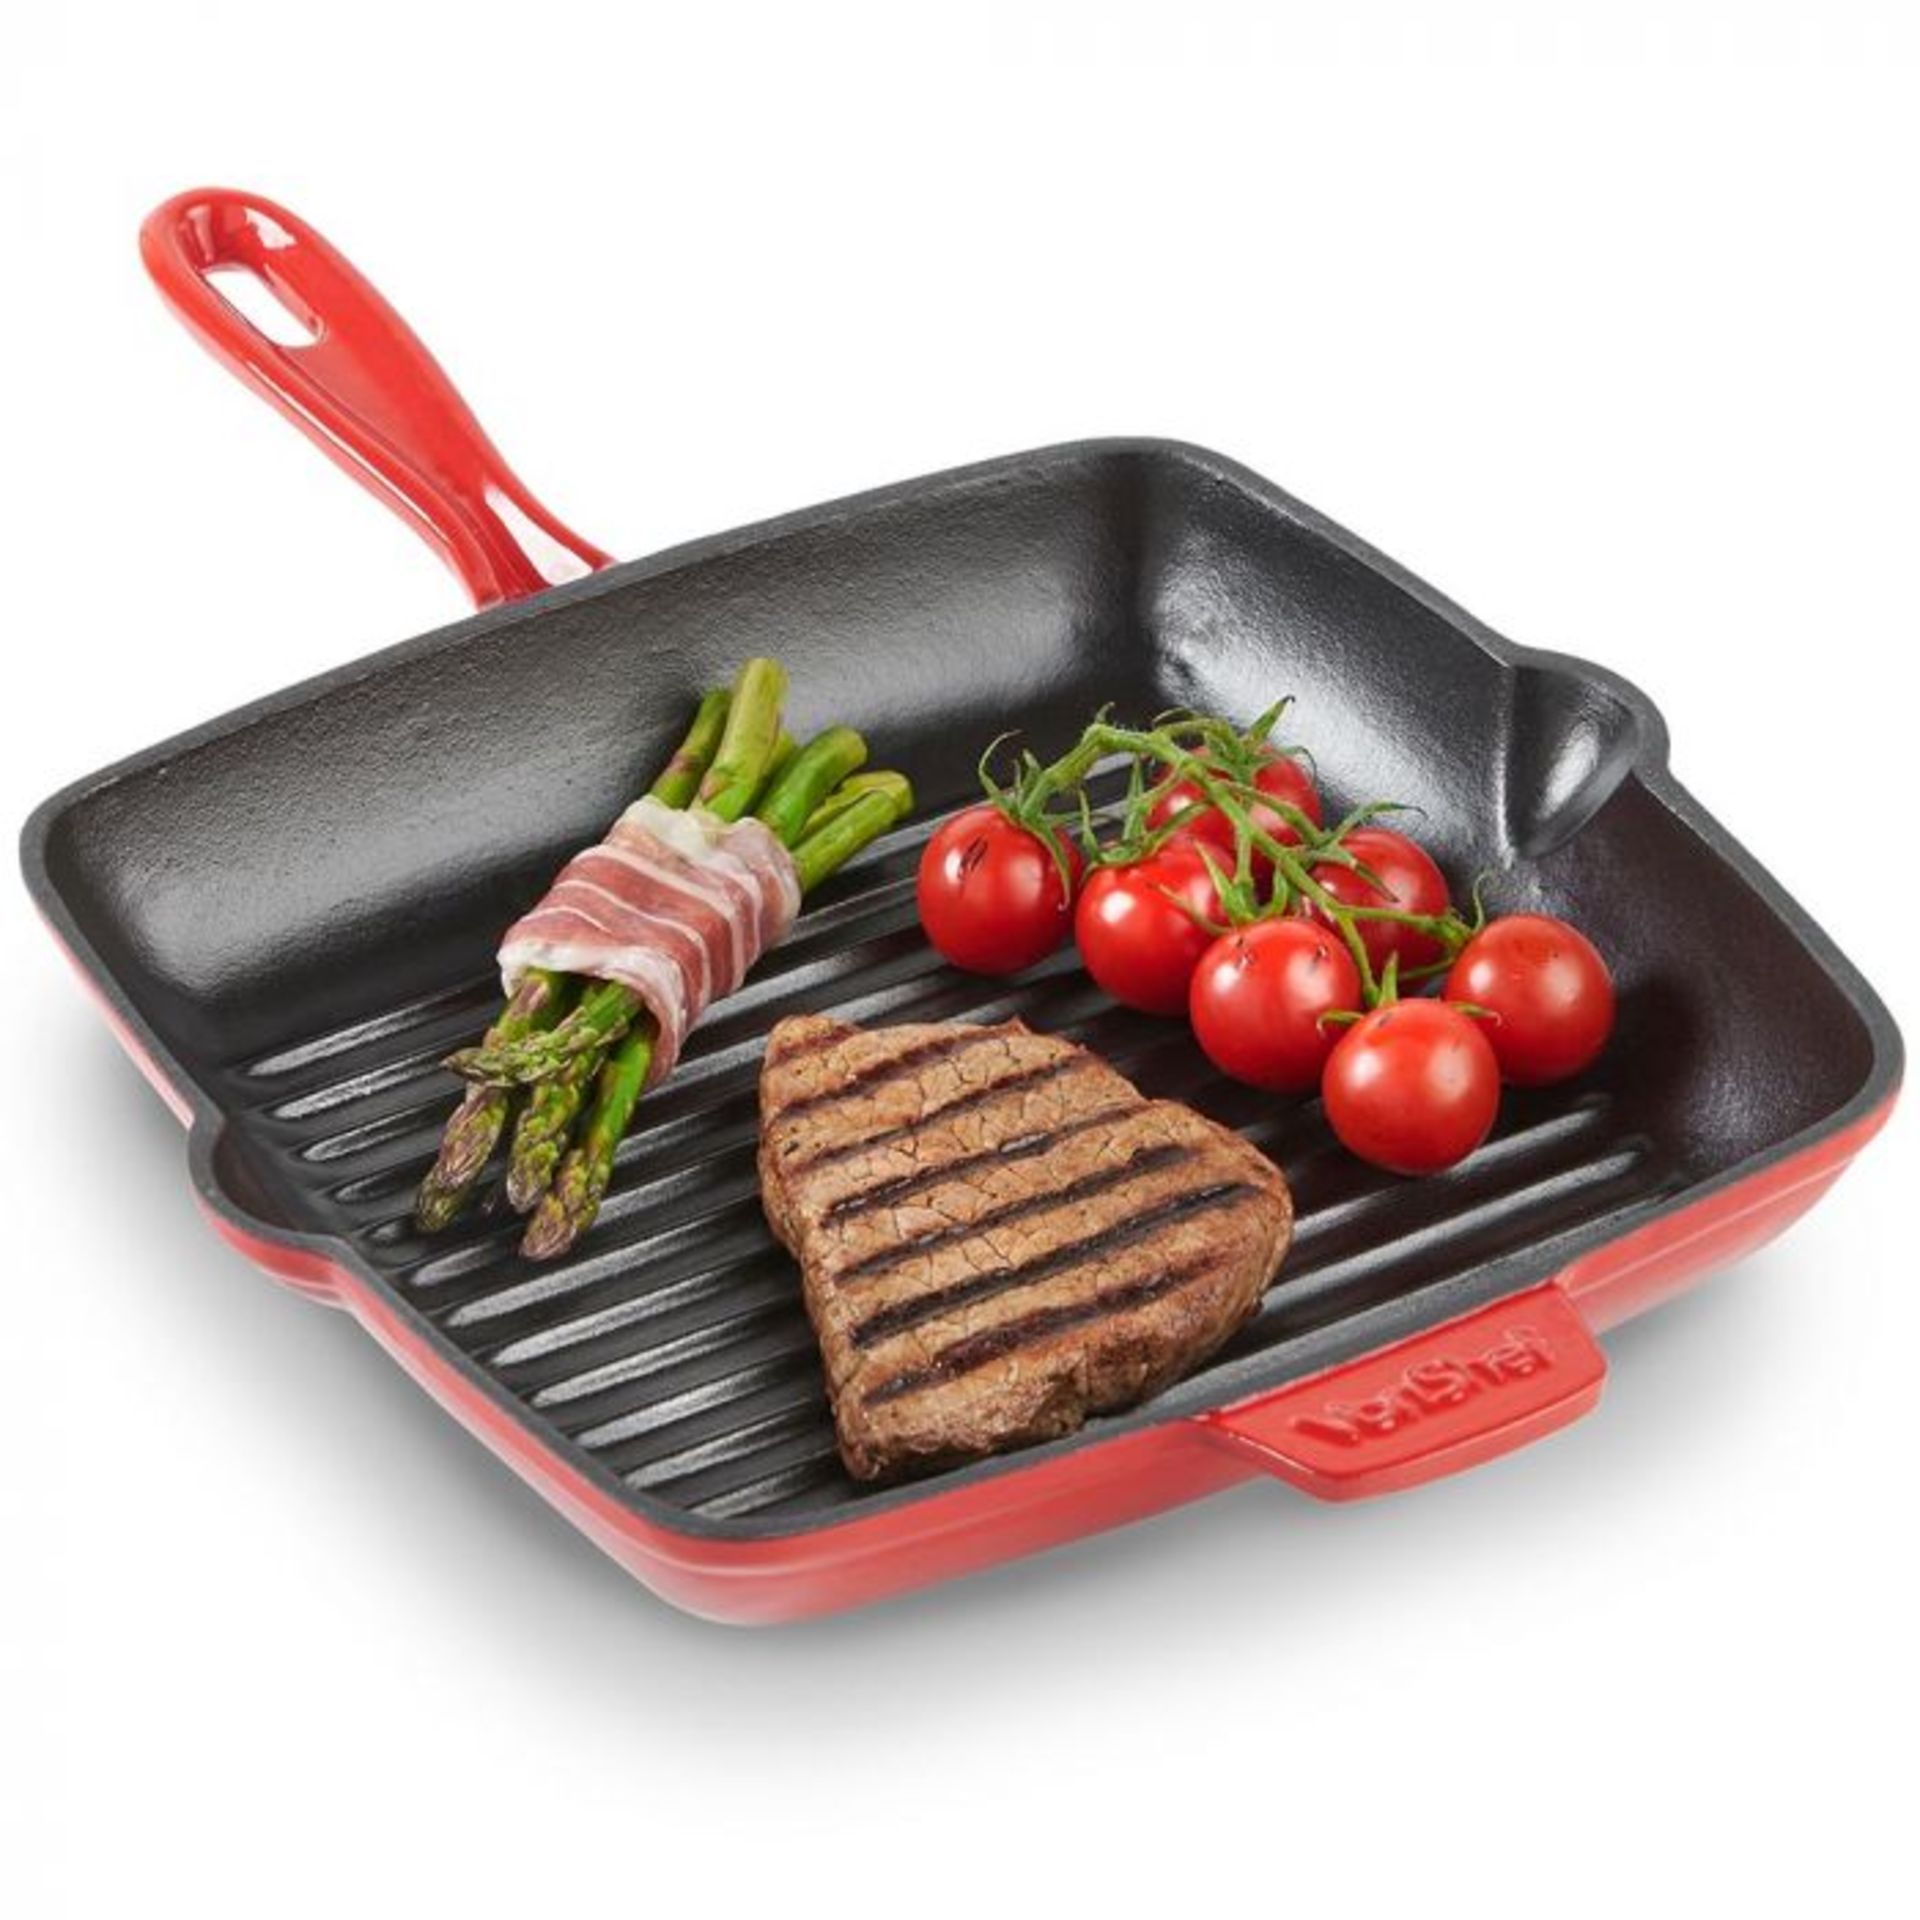 (S86) 26cm Red Cast Iron Griddle Pan Ultra-tough 26cm diameter cast iron construction with ind... - Image 3 of 4